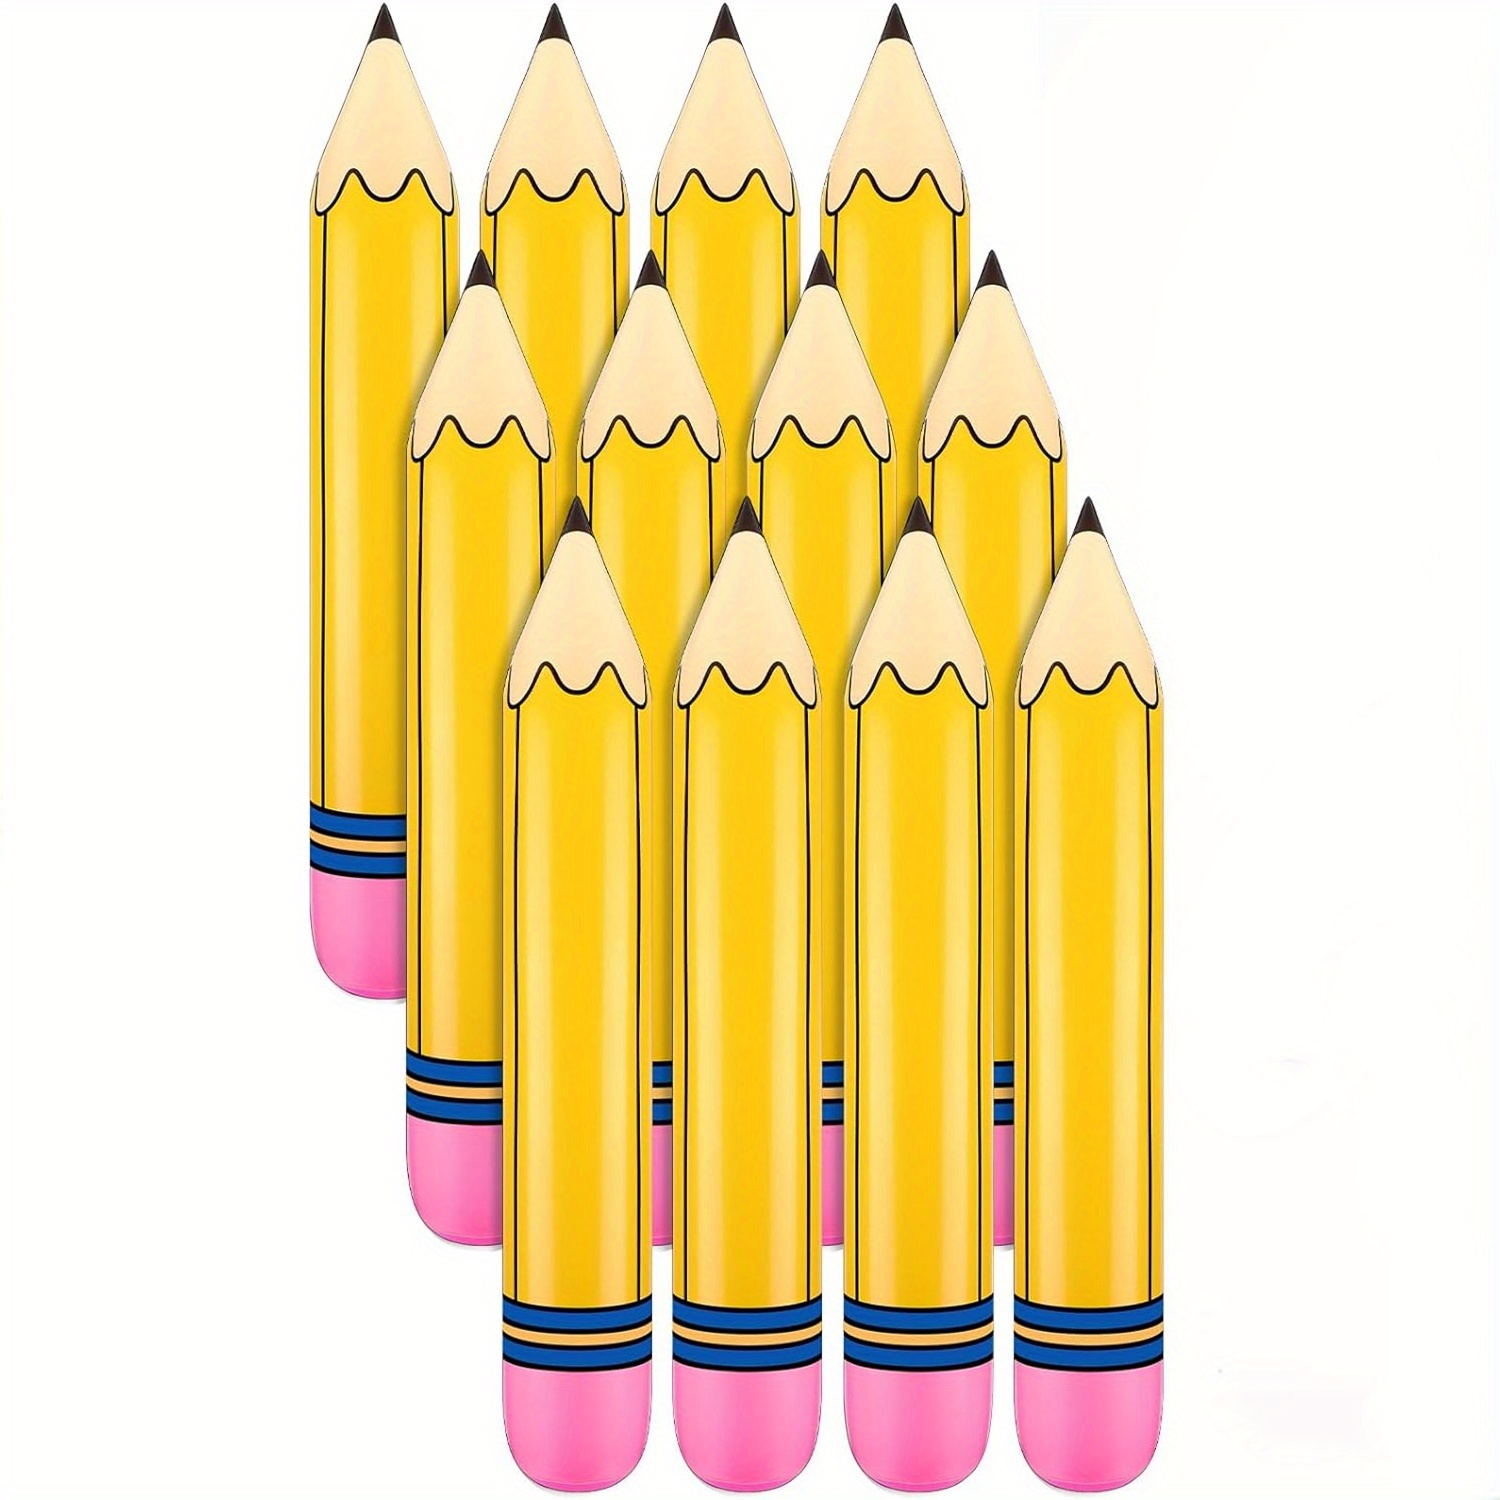 

Giant Inflatable Pencil Multi-pack For Birthday Party Favors, Classroom Decoration, Back To School, Graduation Decor - Plastic Material, No Electricity Needed, Suitable For Ages 14+